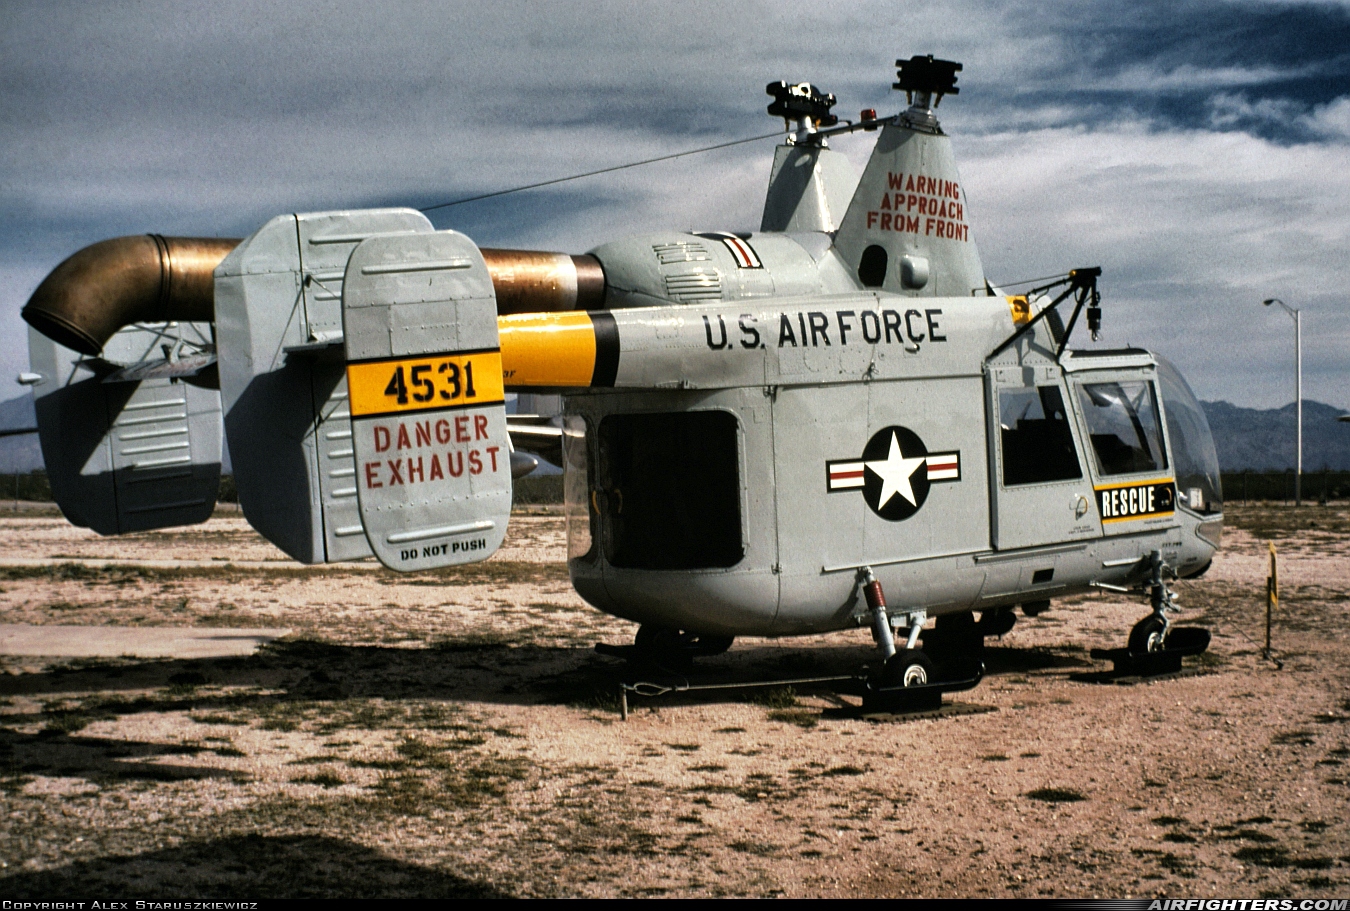 USA - Air Force Kaman HH-43F Huskie (K-600) 62-4531 at Tucson - Pima Air and Space Museum, USA